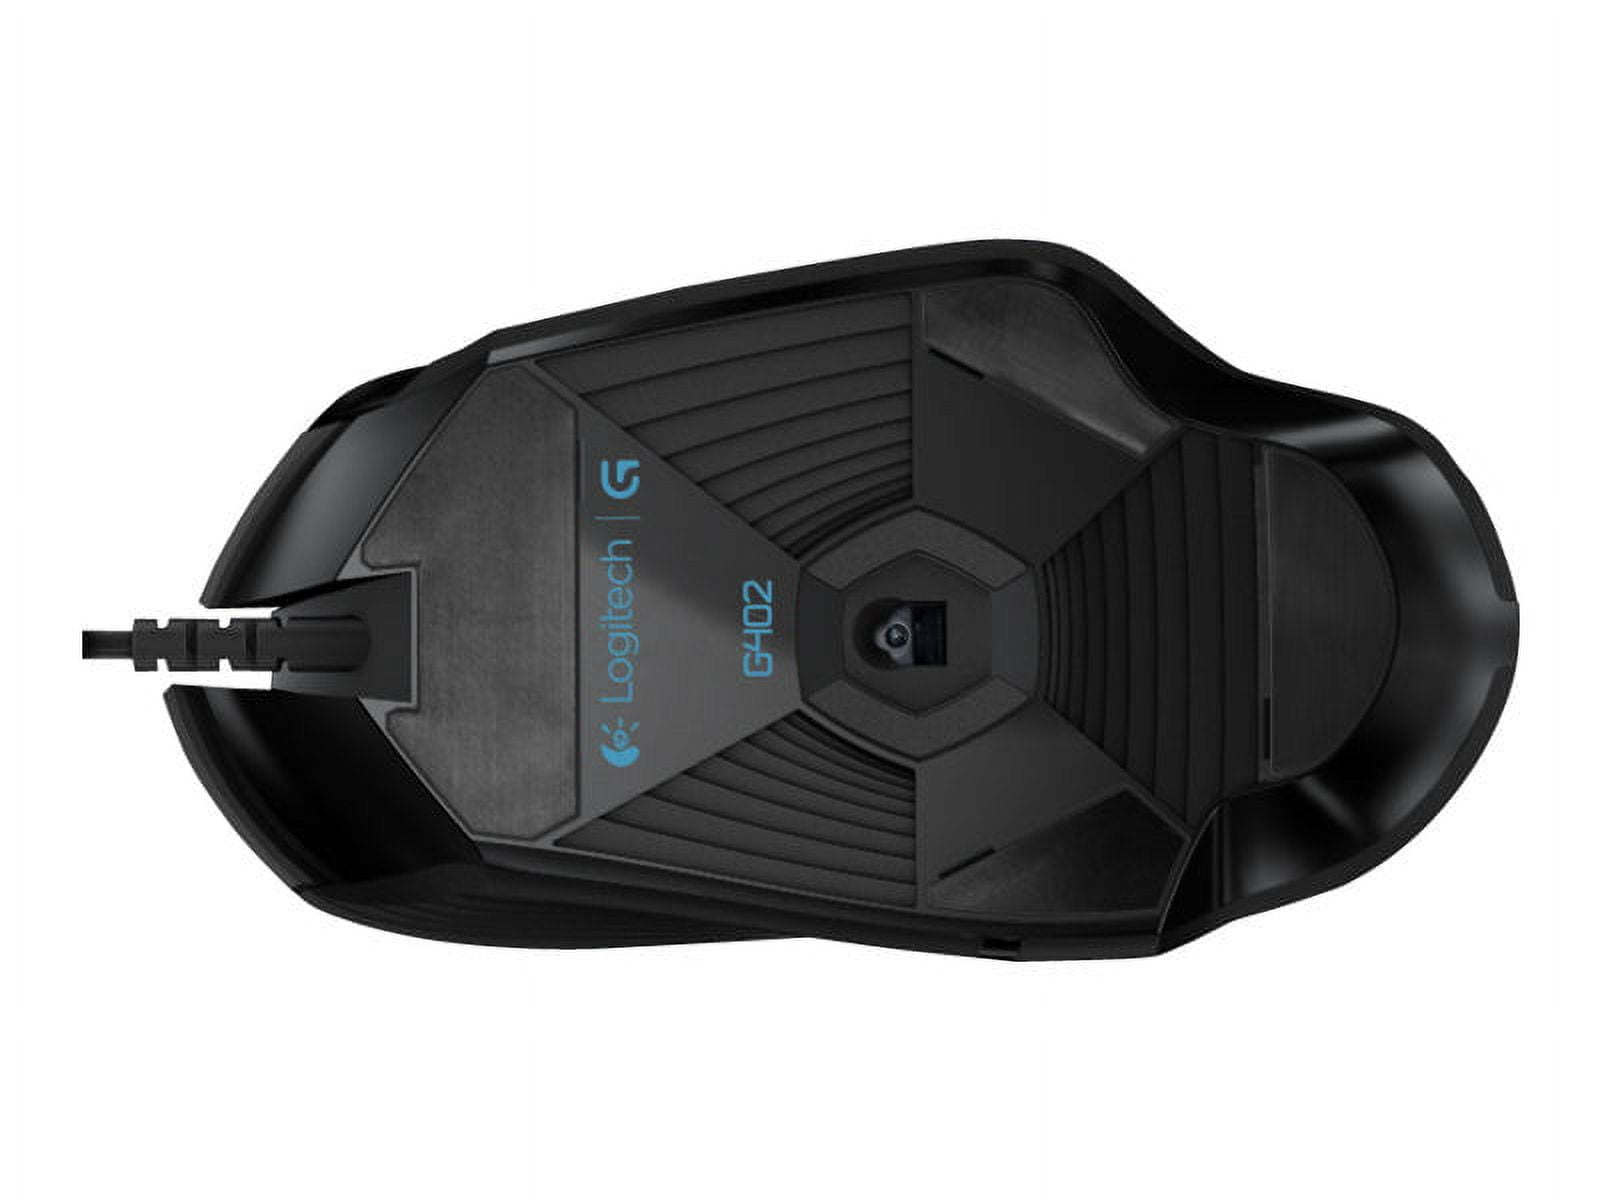 Logitech G402 Hyperion Fury (910004067) Wired Gaming Mouse 5099206051768